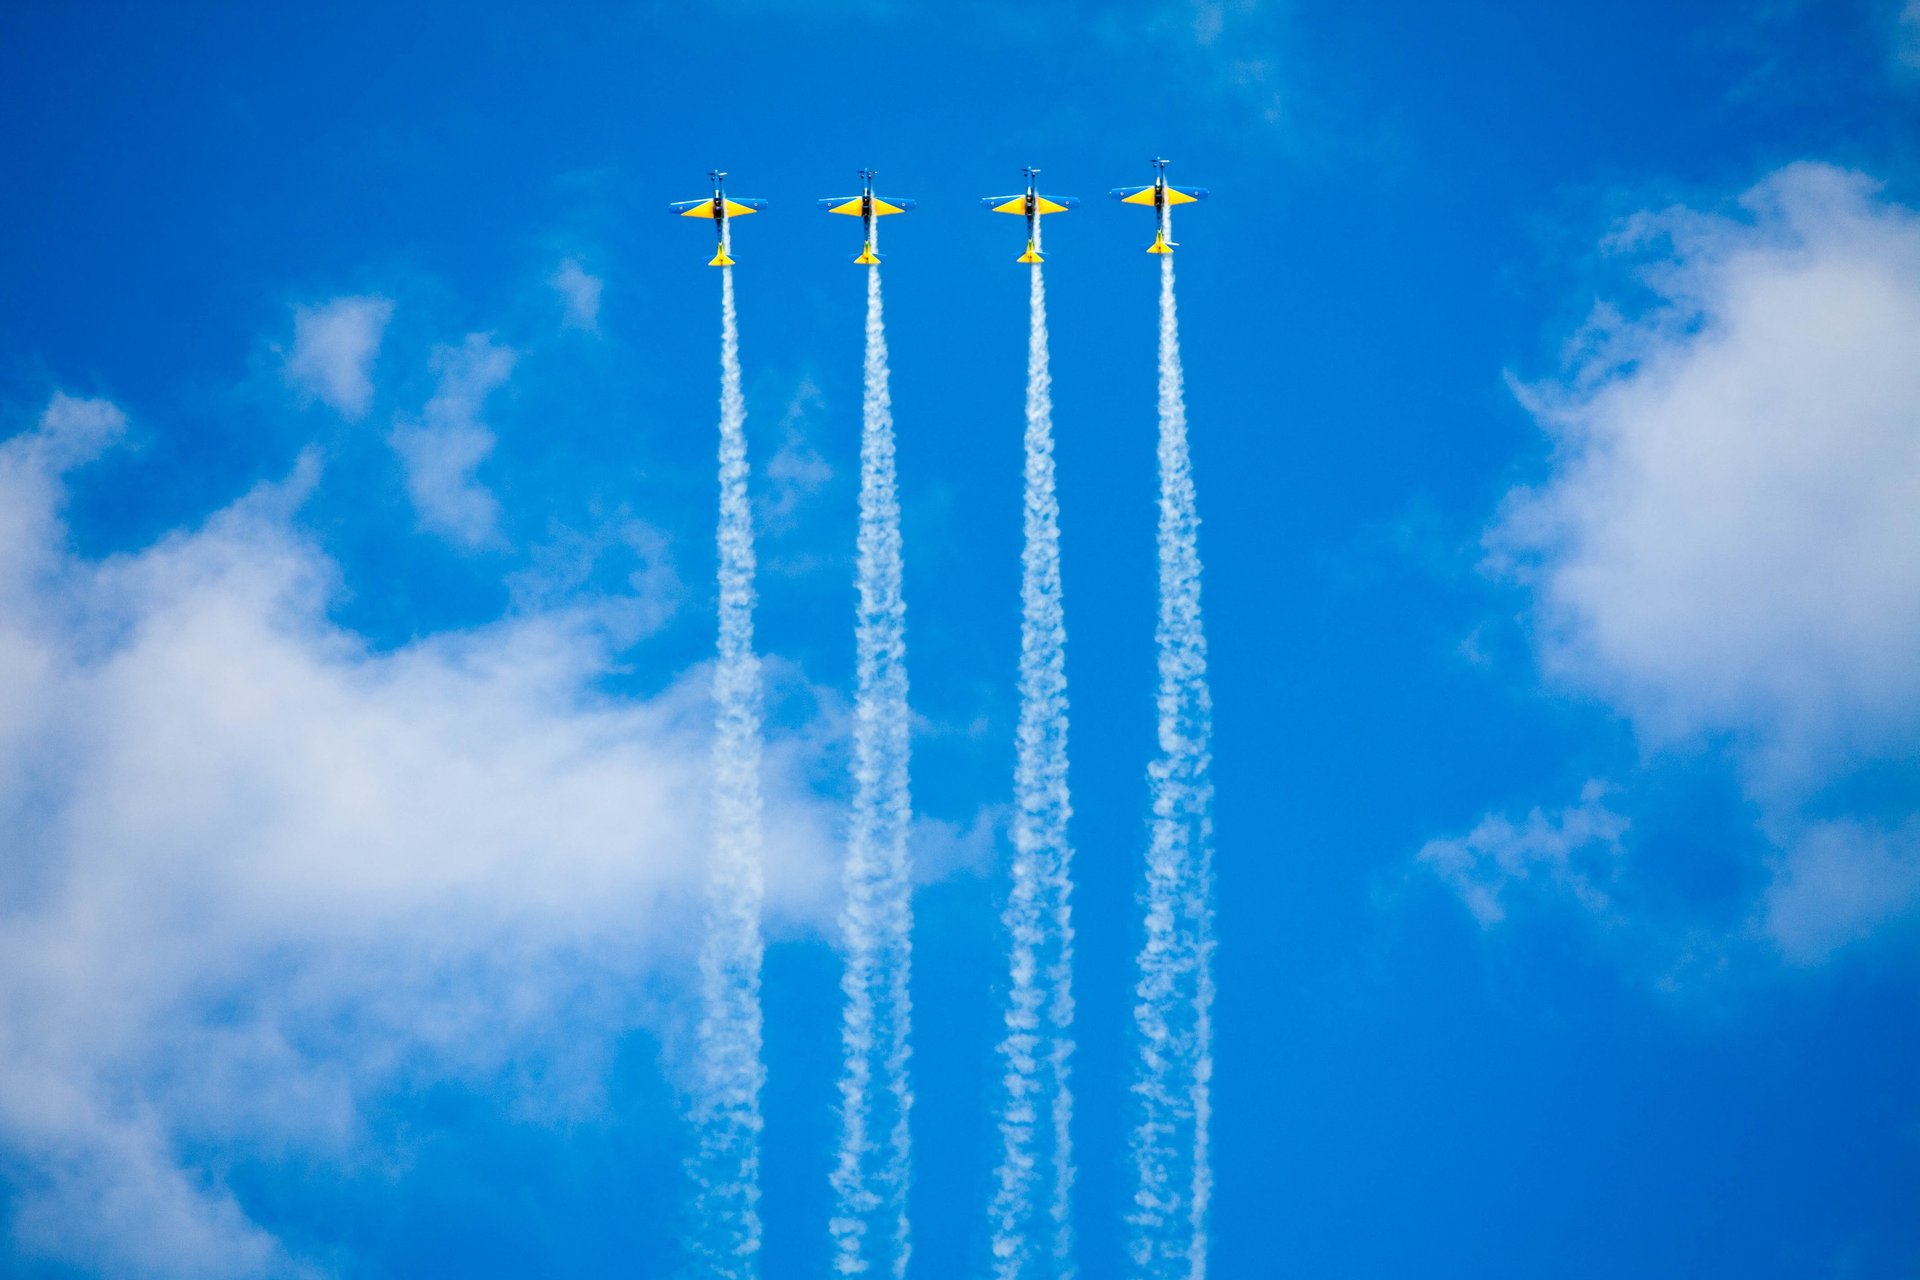 Four planes flying across a blue sky to represent QA processes heading towards business goals